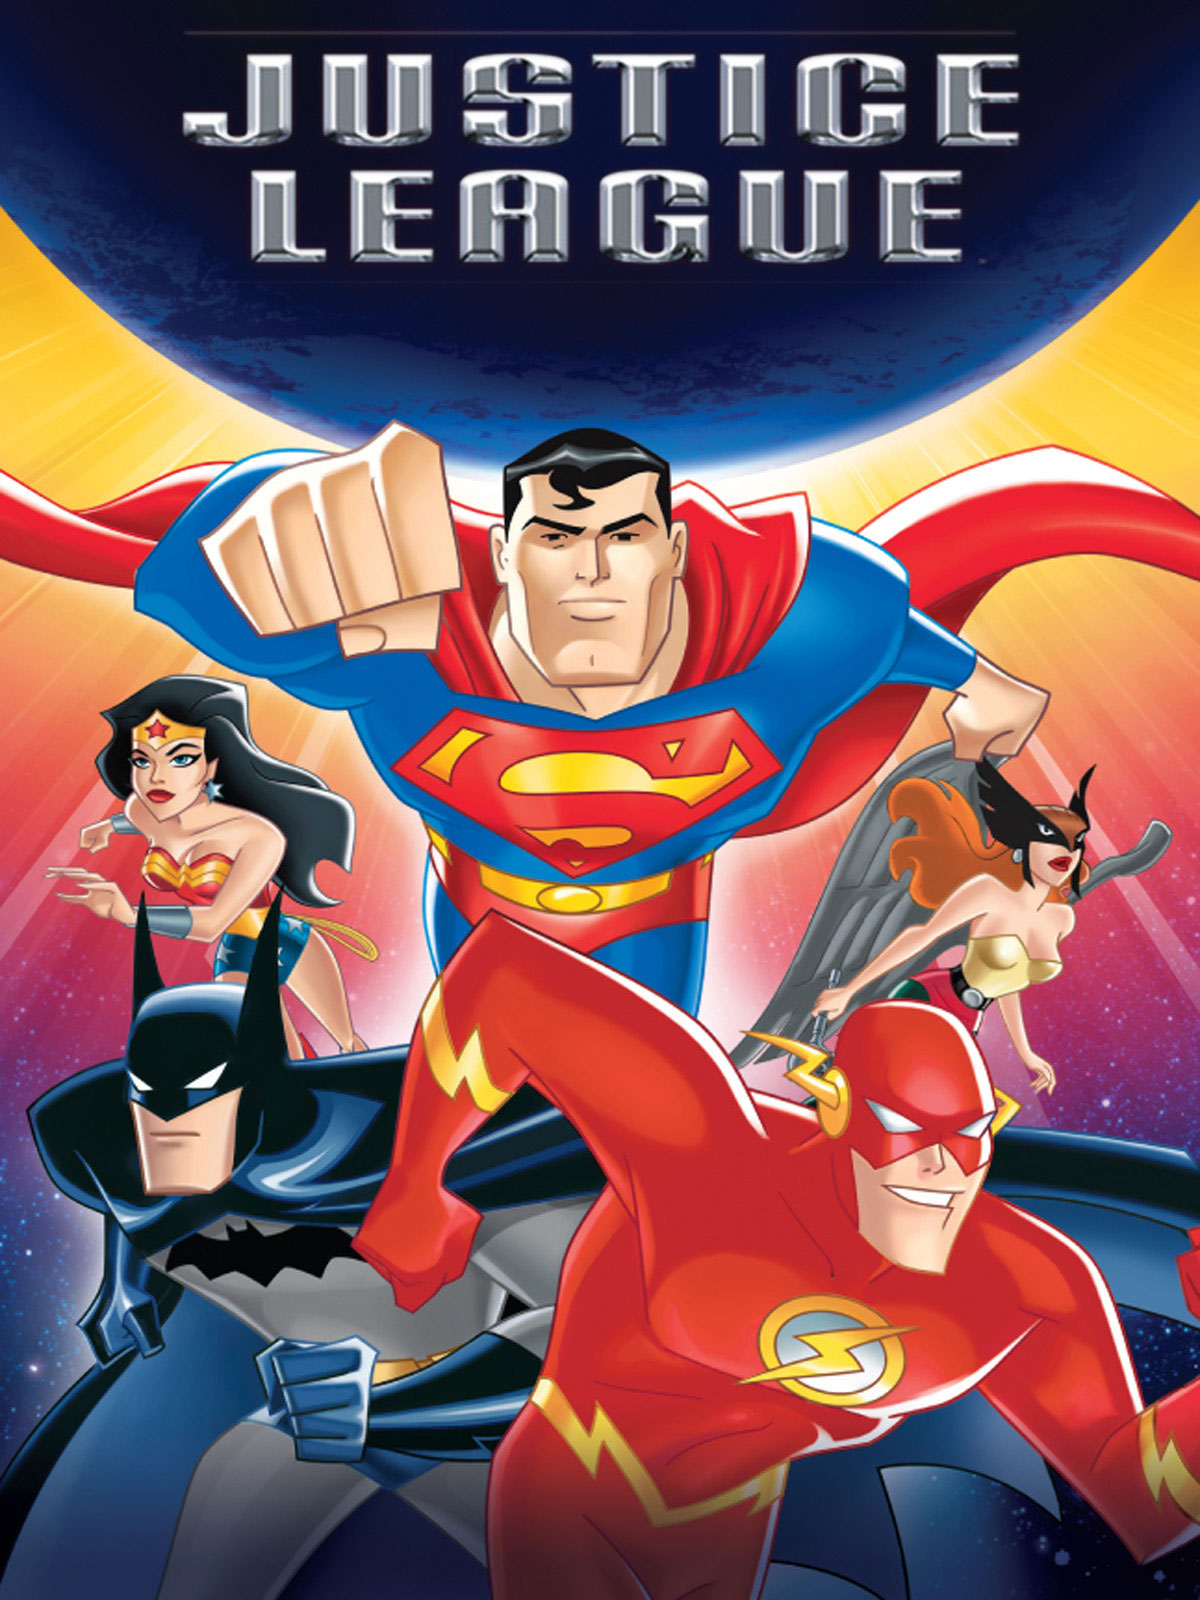 DC Comics to Publish Batman and the Justice League Manga in October - News  - Anime News Network